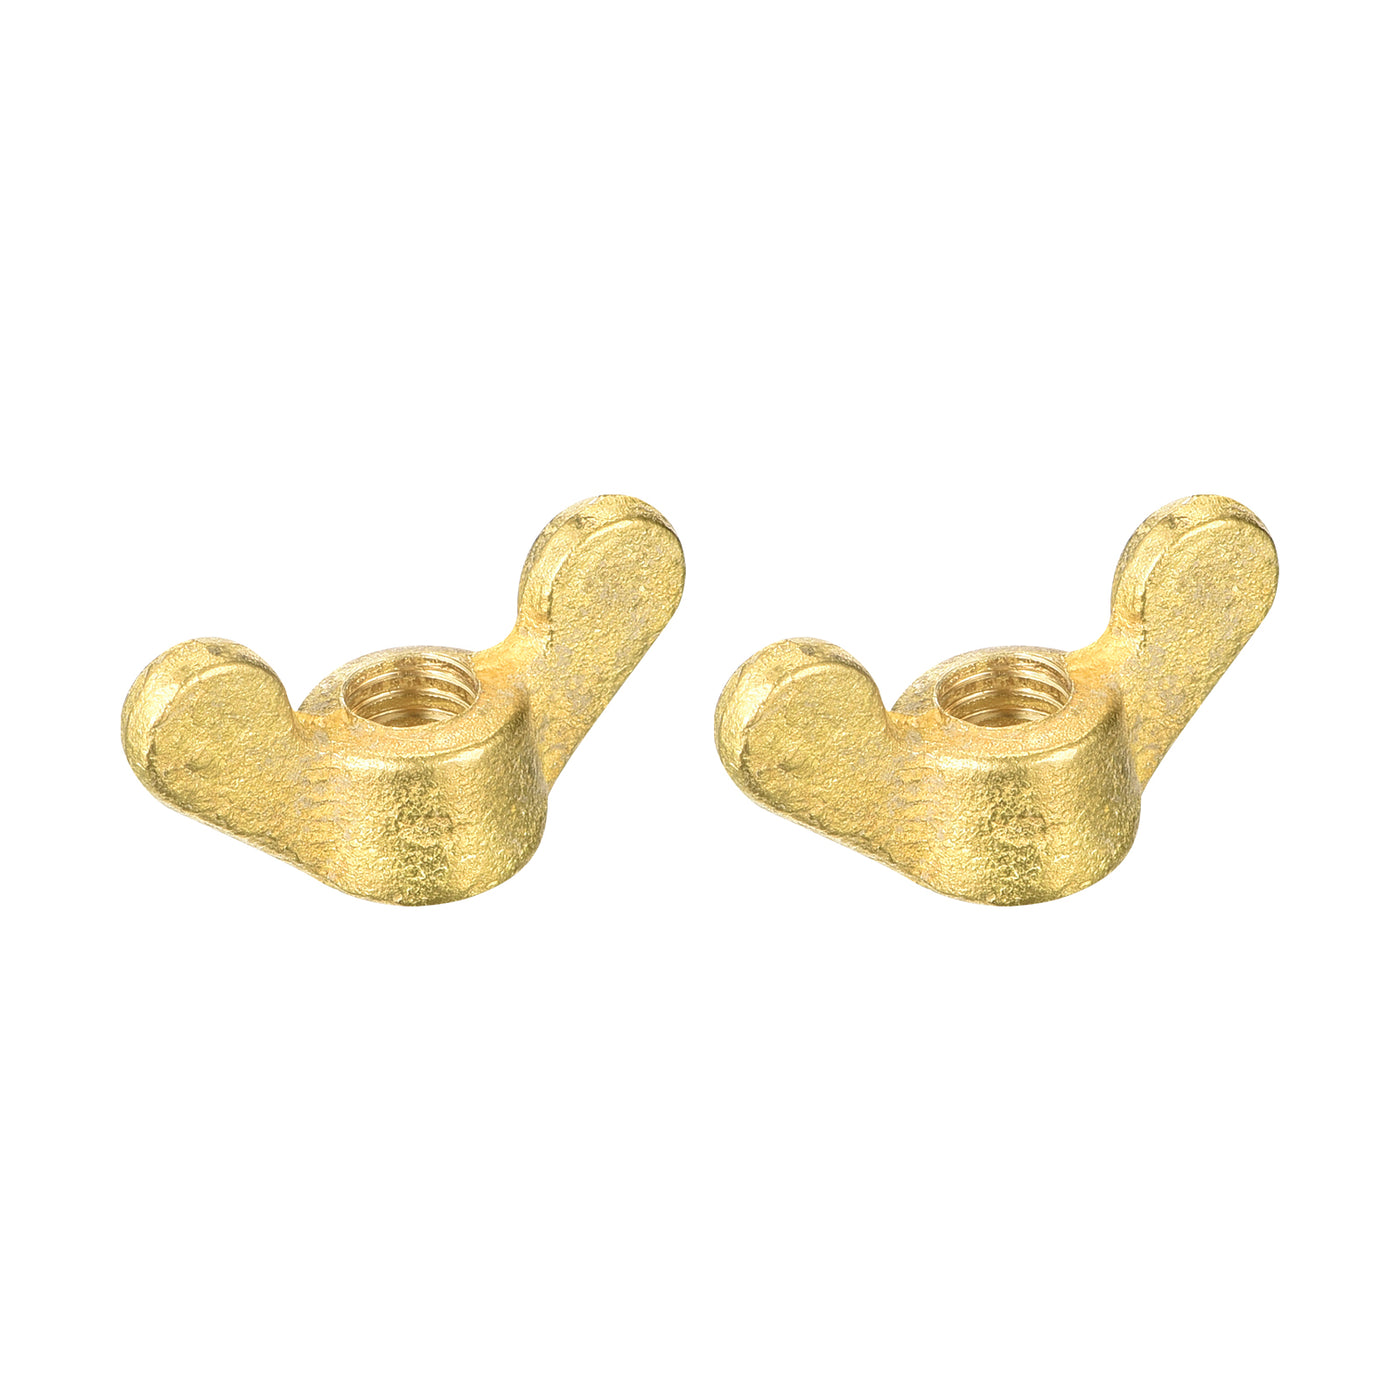 uxcell Uxcell Brass Wing Nuts, M6 Butterfly Nut Hand Twist Tighten Fasteners for Furniture, Machinery, Electronic Equipment, 2Pcs